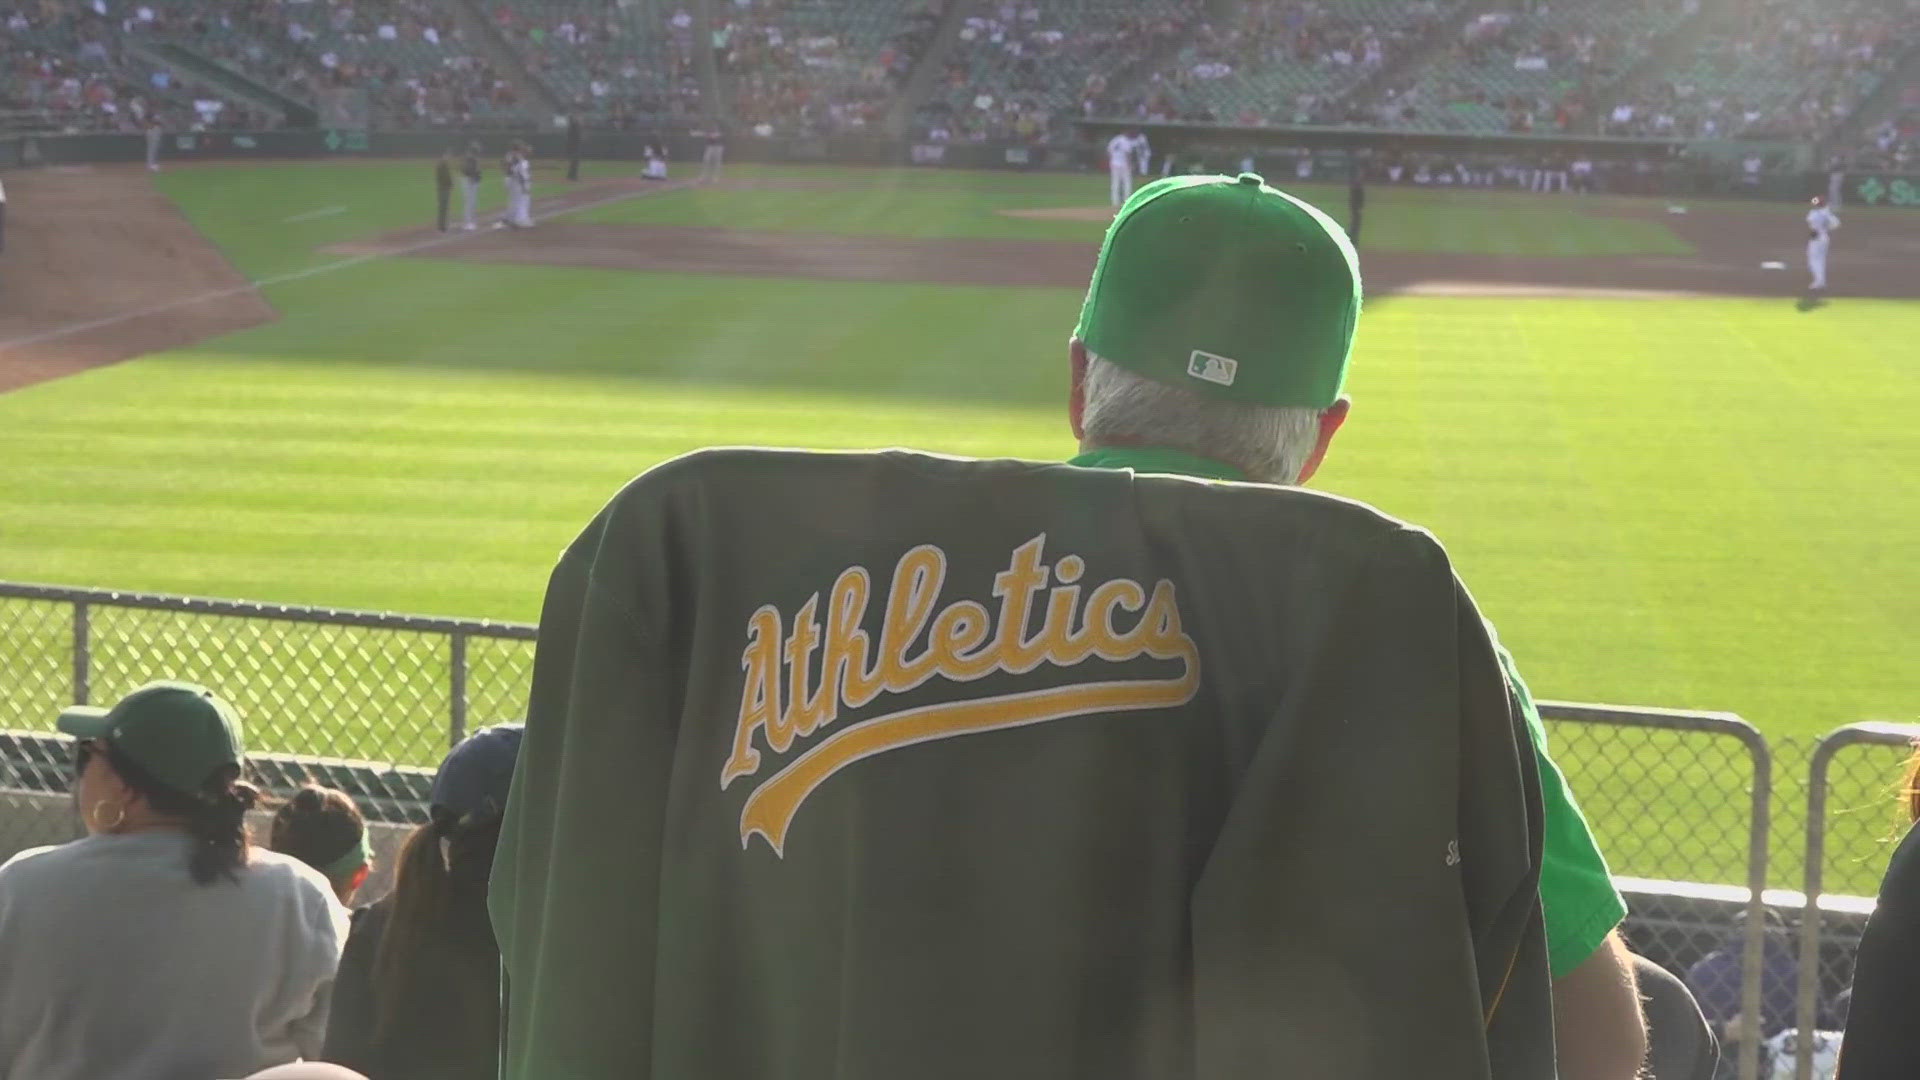 The A's requested up to seven home games a season to not be played at home.